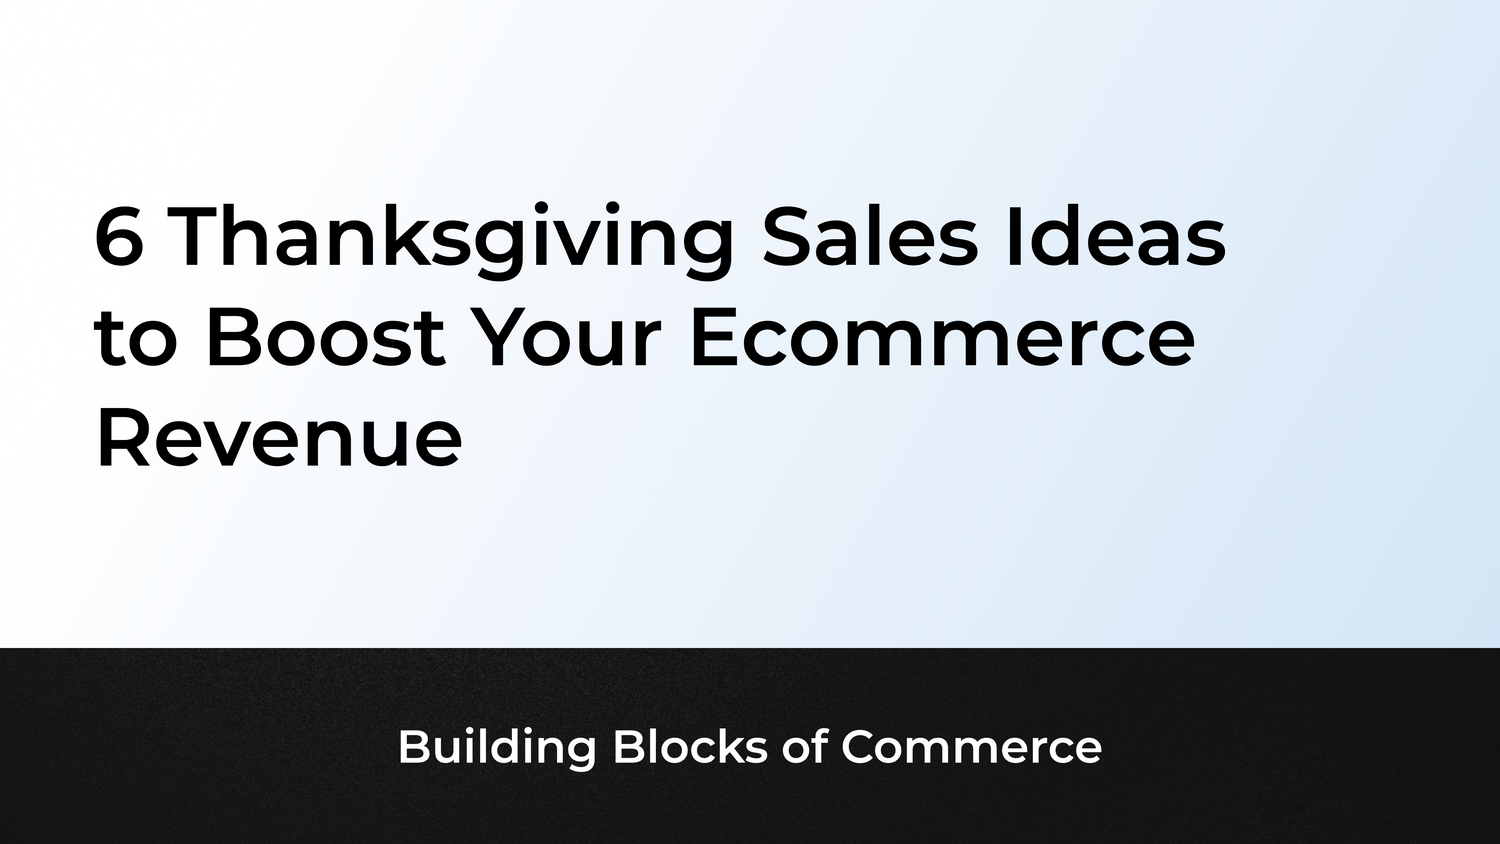 6 Thanksgiving Sales Ideas to Boost Your Ecommerce Revenue